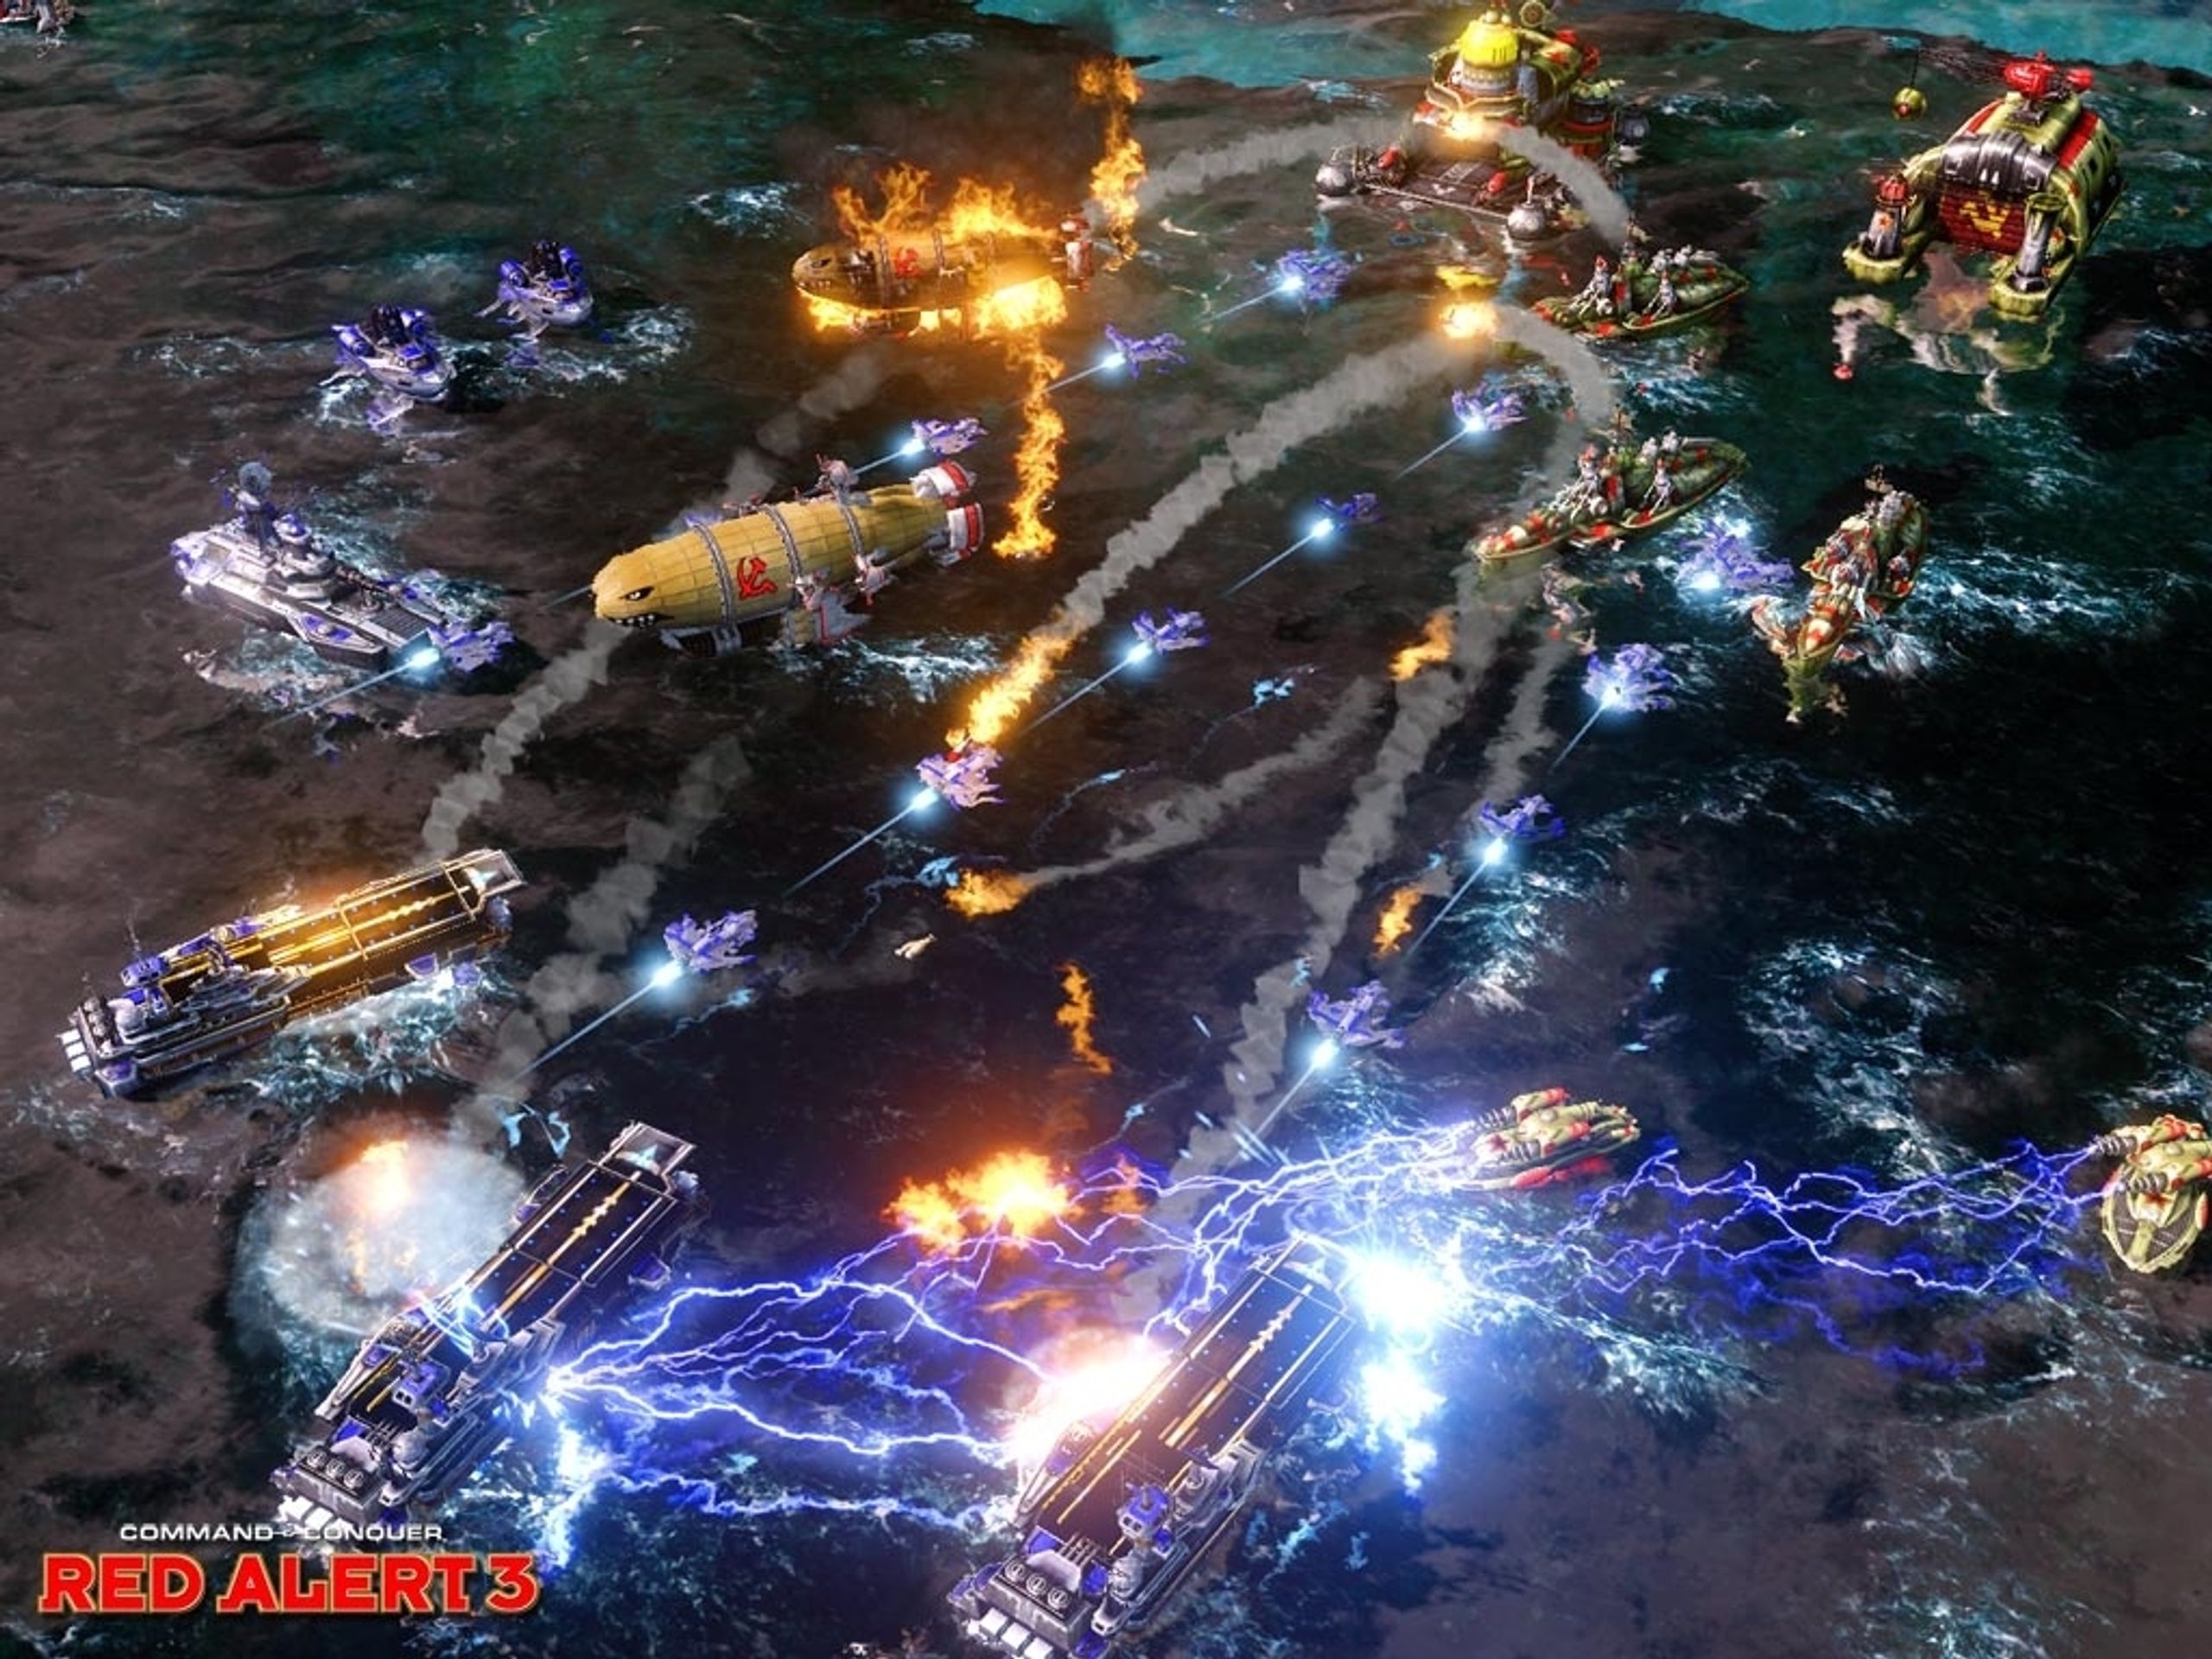 Command & Conquer: Red Alert 3 - Red Alert 3 galerie (8/16)